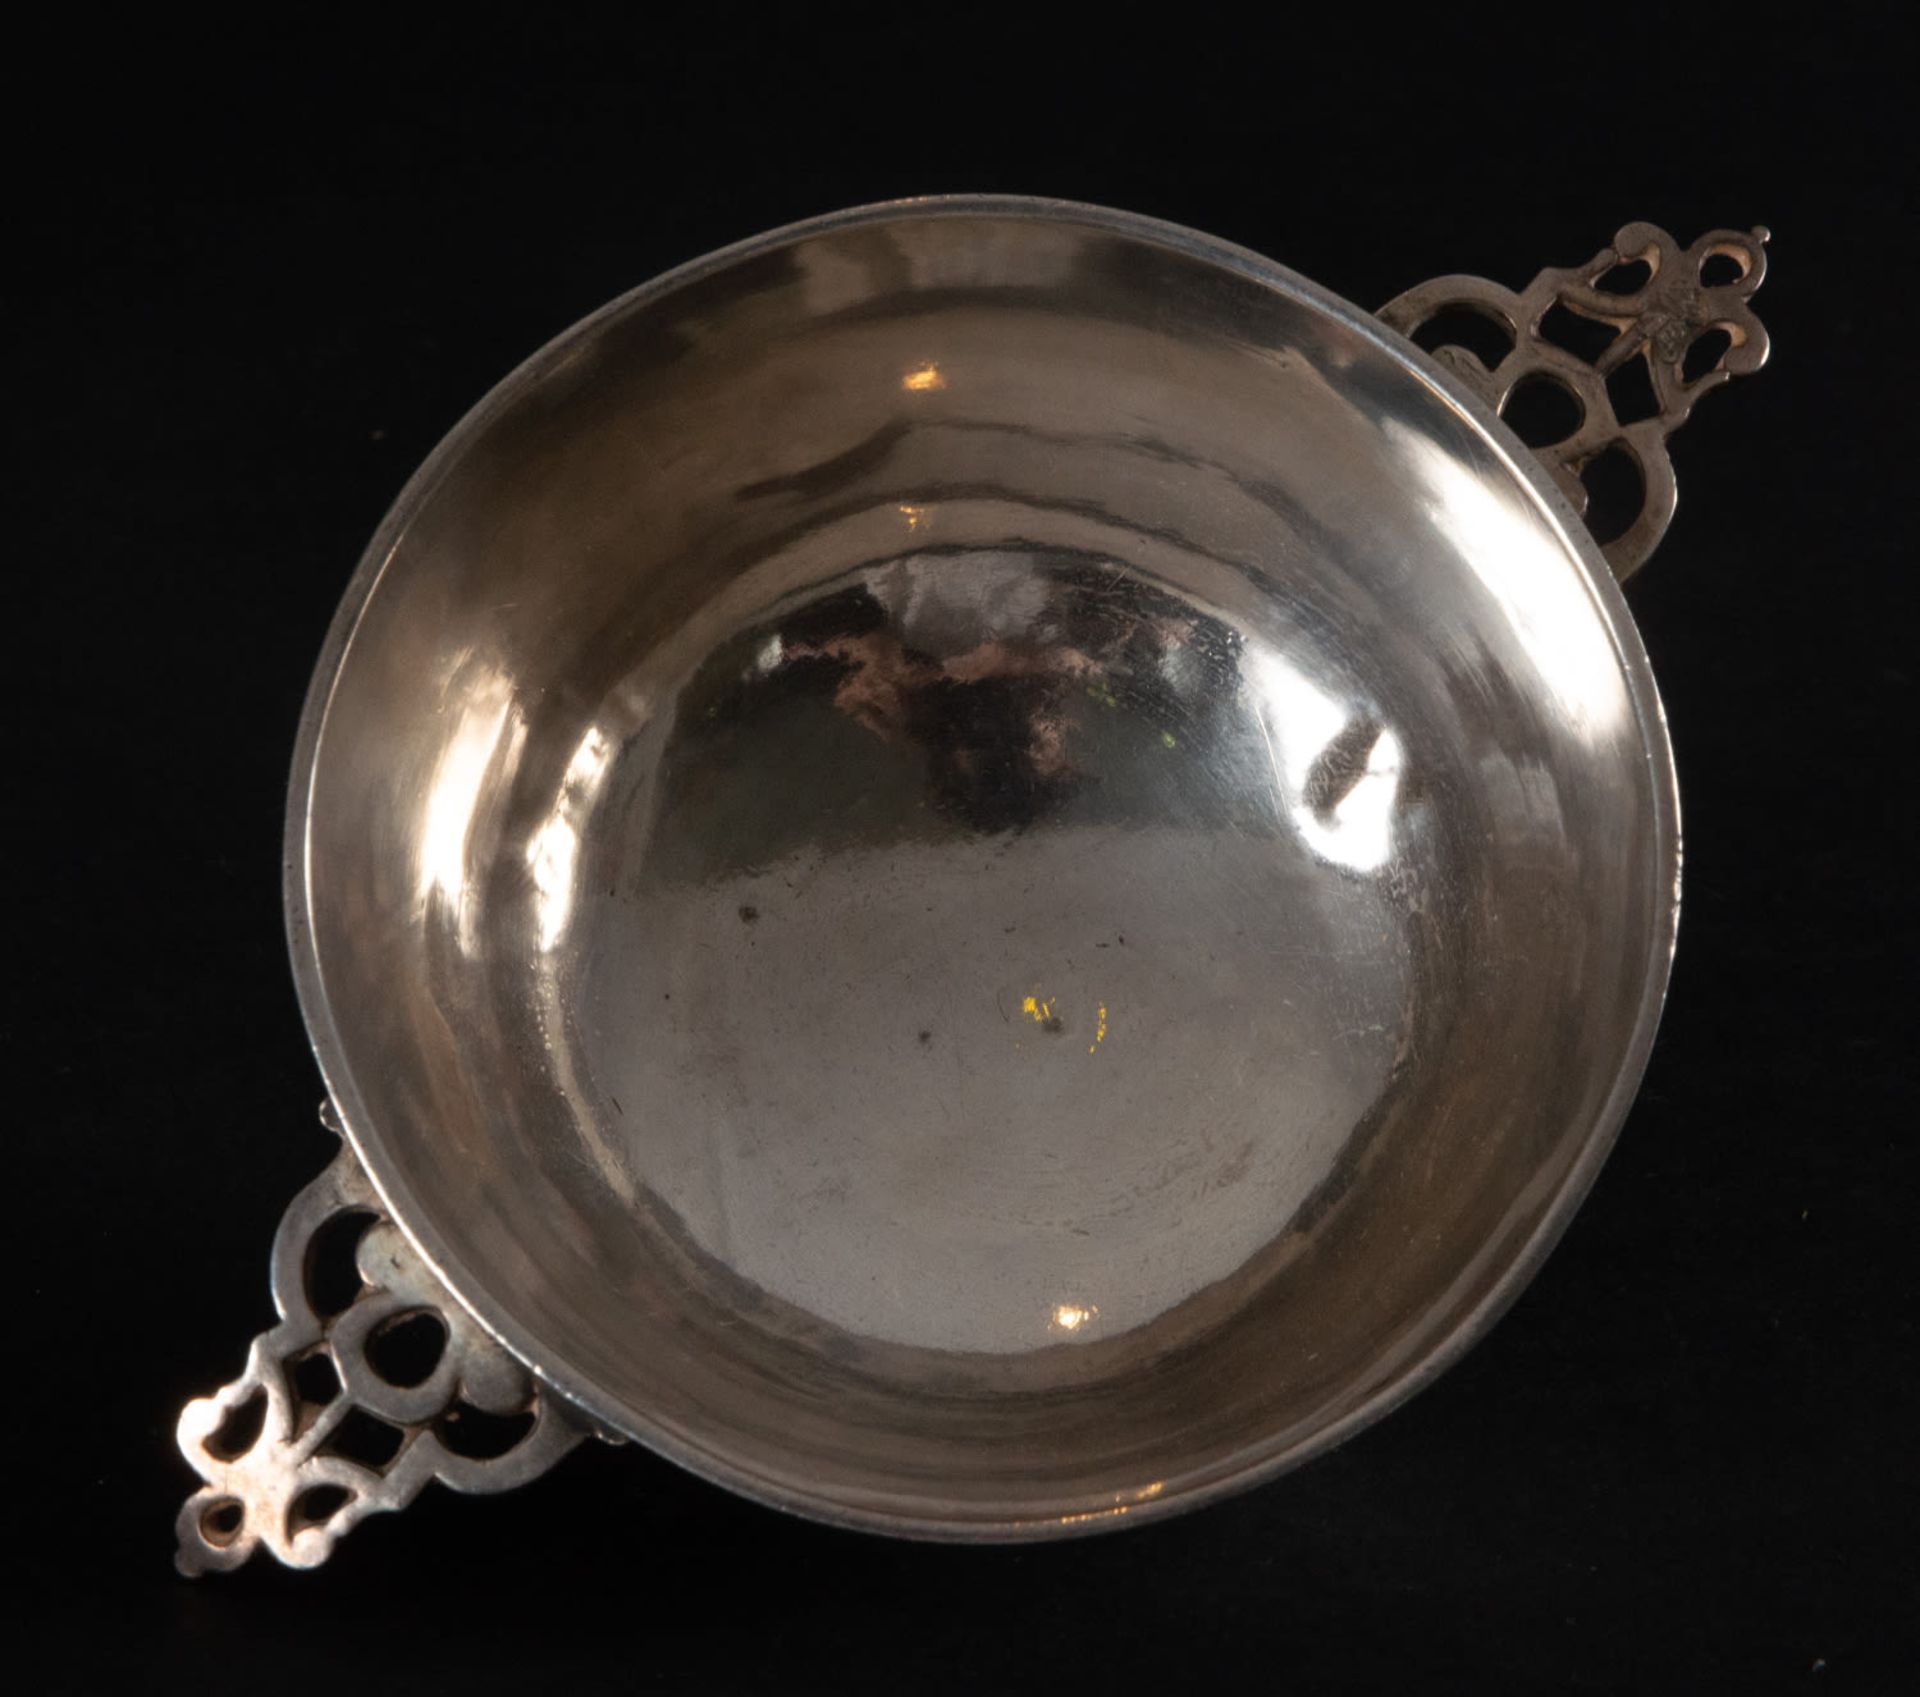 Pair of Wine Glass and Salvilla in solid silver from the 18th century, marks of Grande, Córdoba - Image 4 of 5